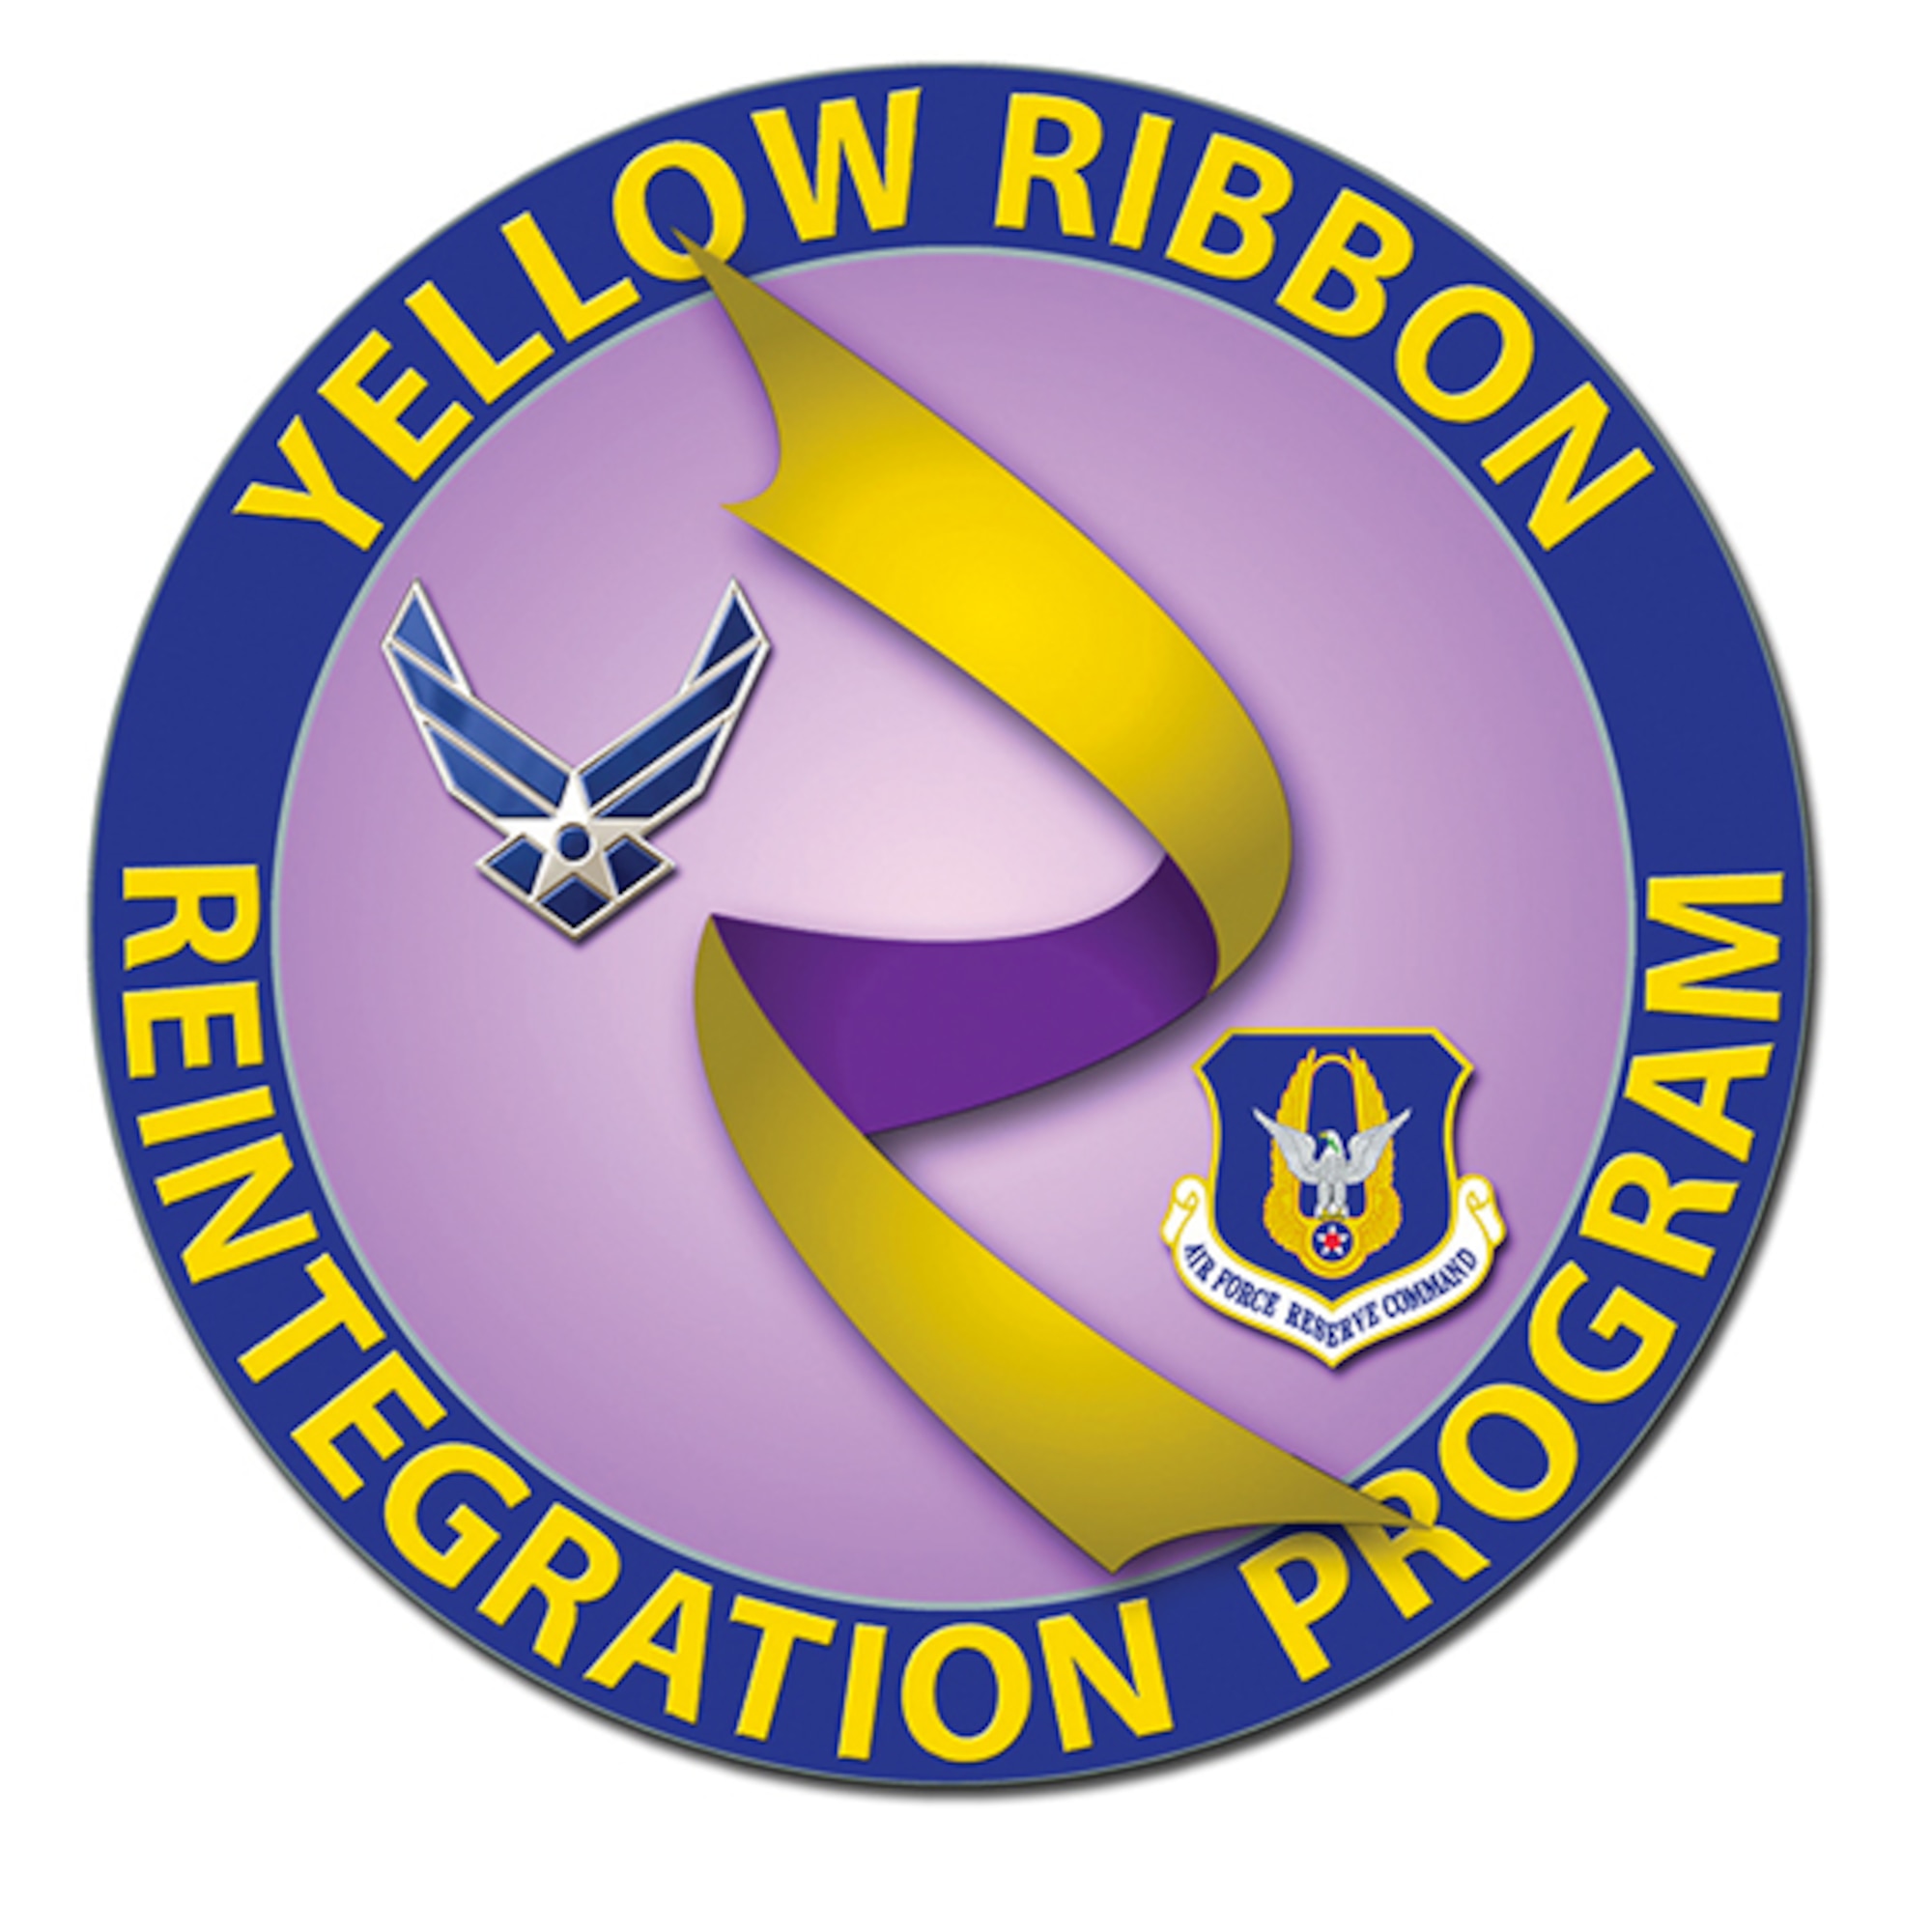 Deploying? Consider taking advantage of the Yellow Ribbon program so you and your family are prepared for a smooth departure and return.